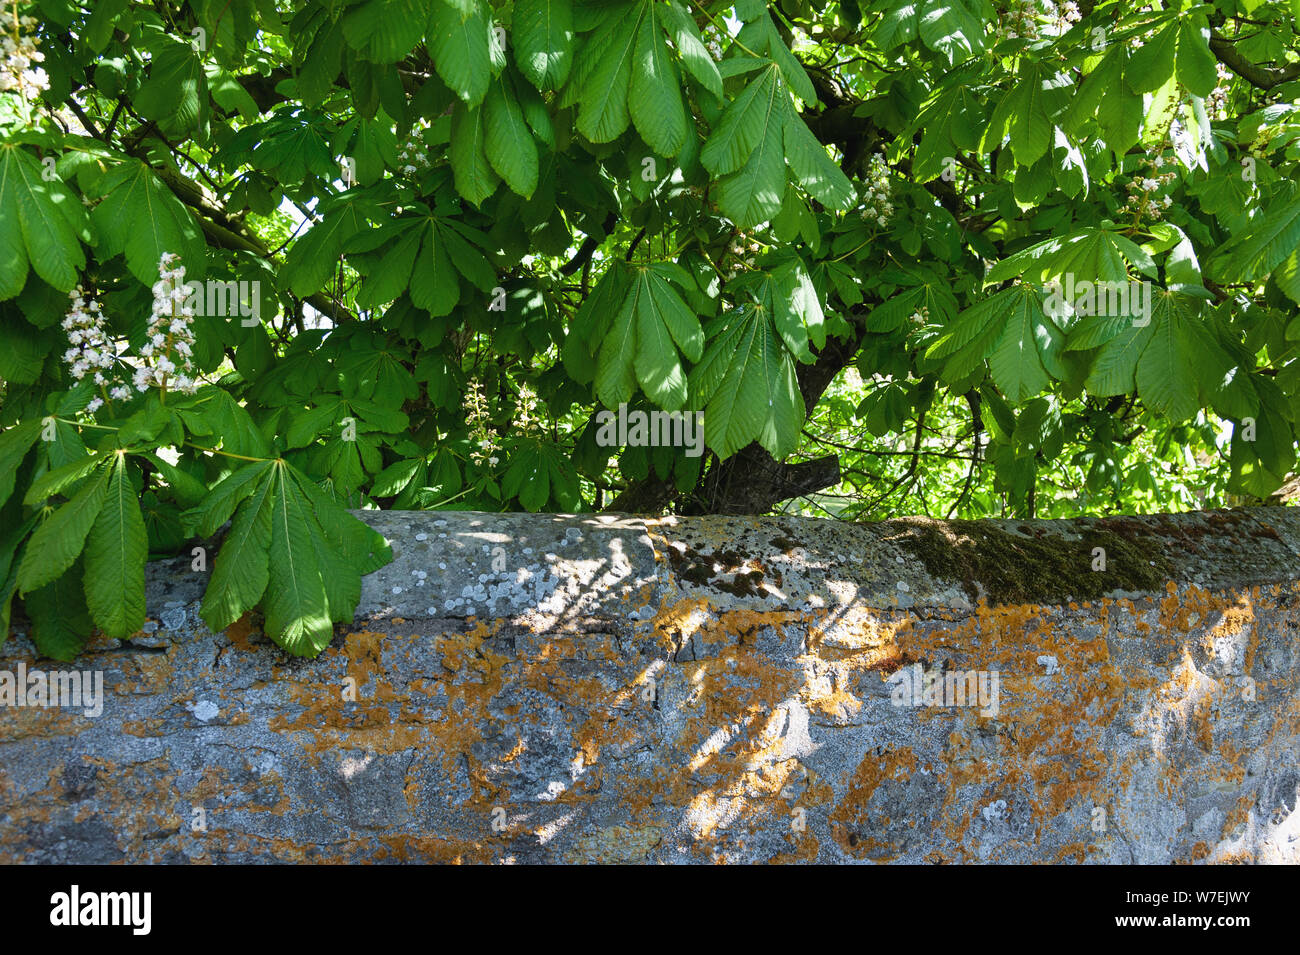 Dappled light coming through horse chestnut leaves above a wall with orange lichen. Stock Photo